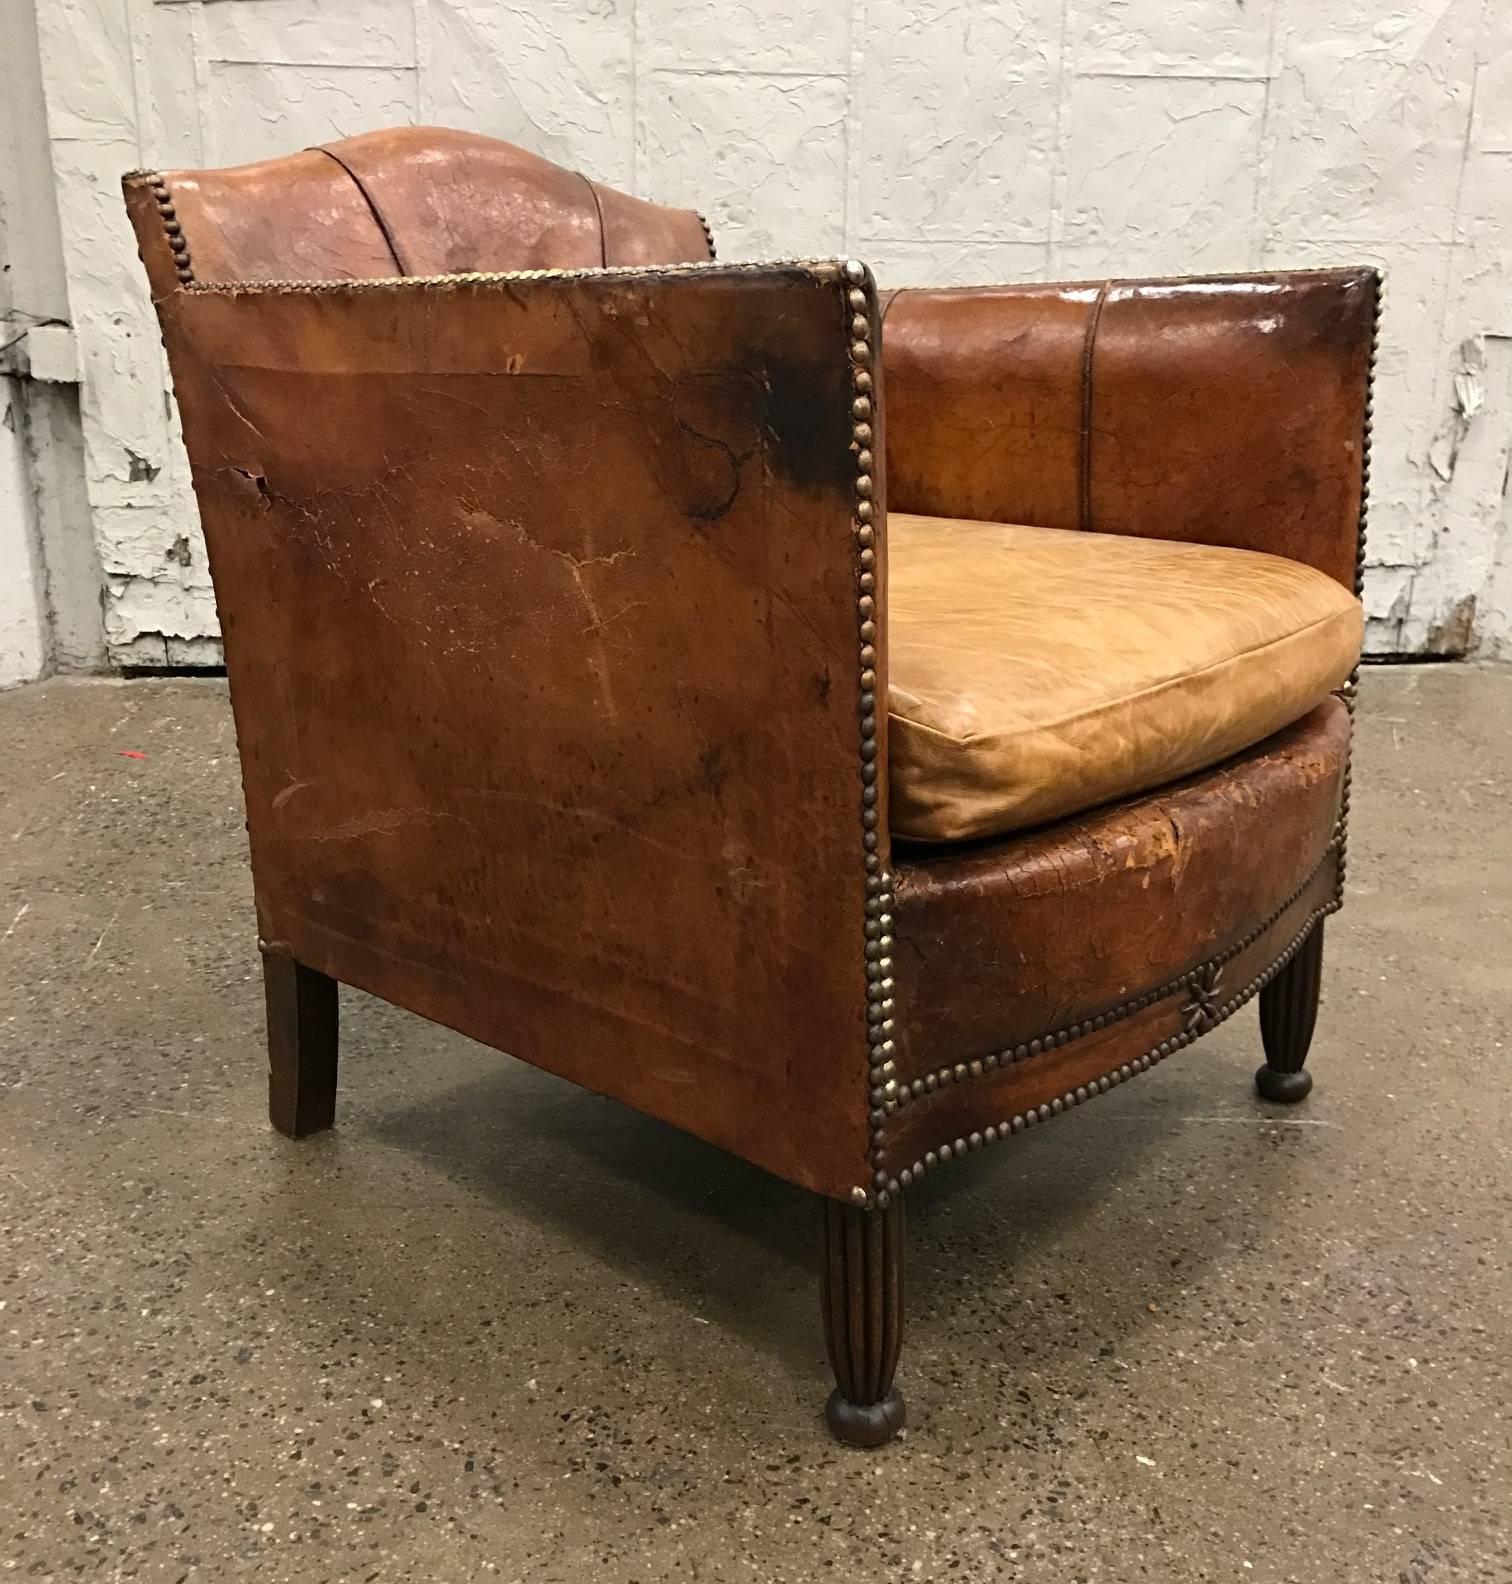 Pair of French Art Deco leather club chairs. The chairs are in vintage condition with tapered walnut legs. Has the original brass tacks to the arms and the leather is nicely worn.